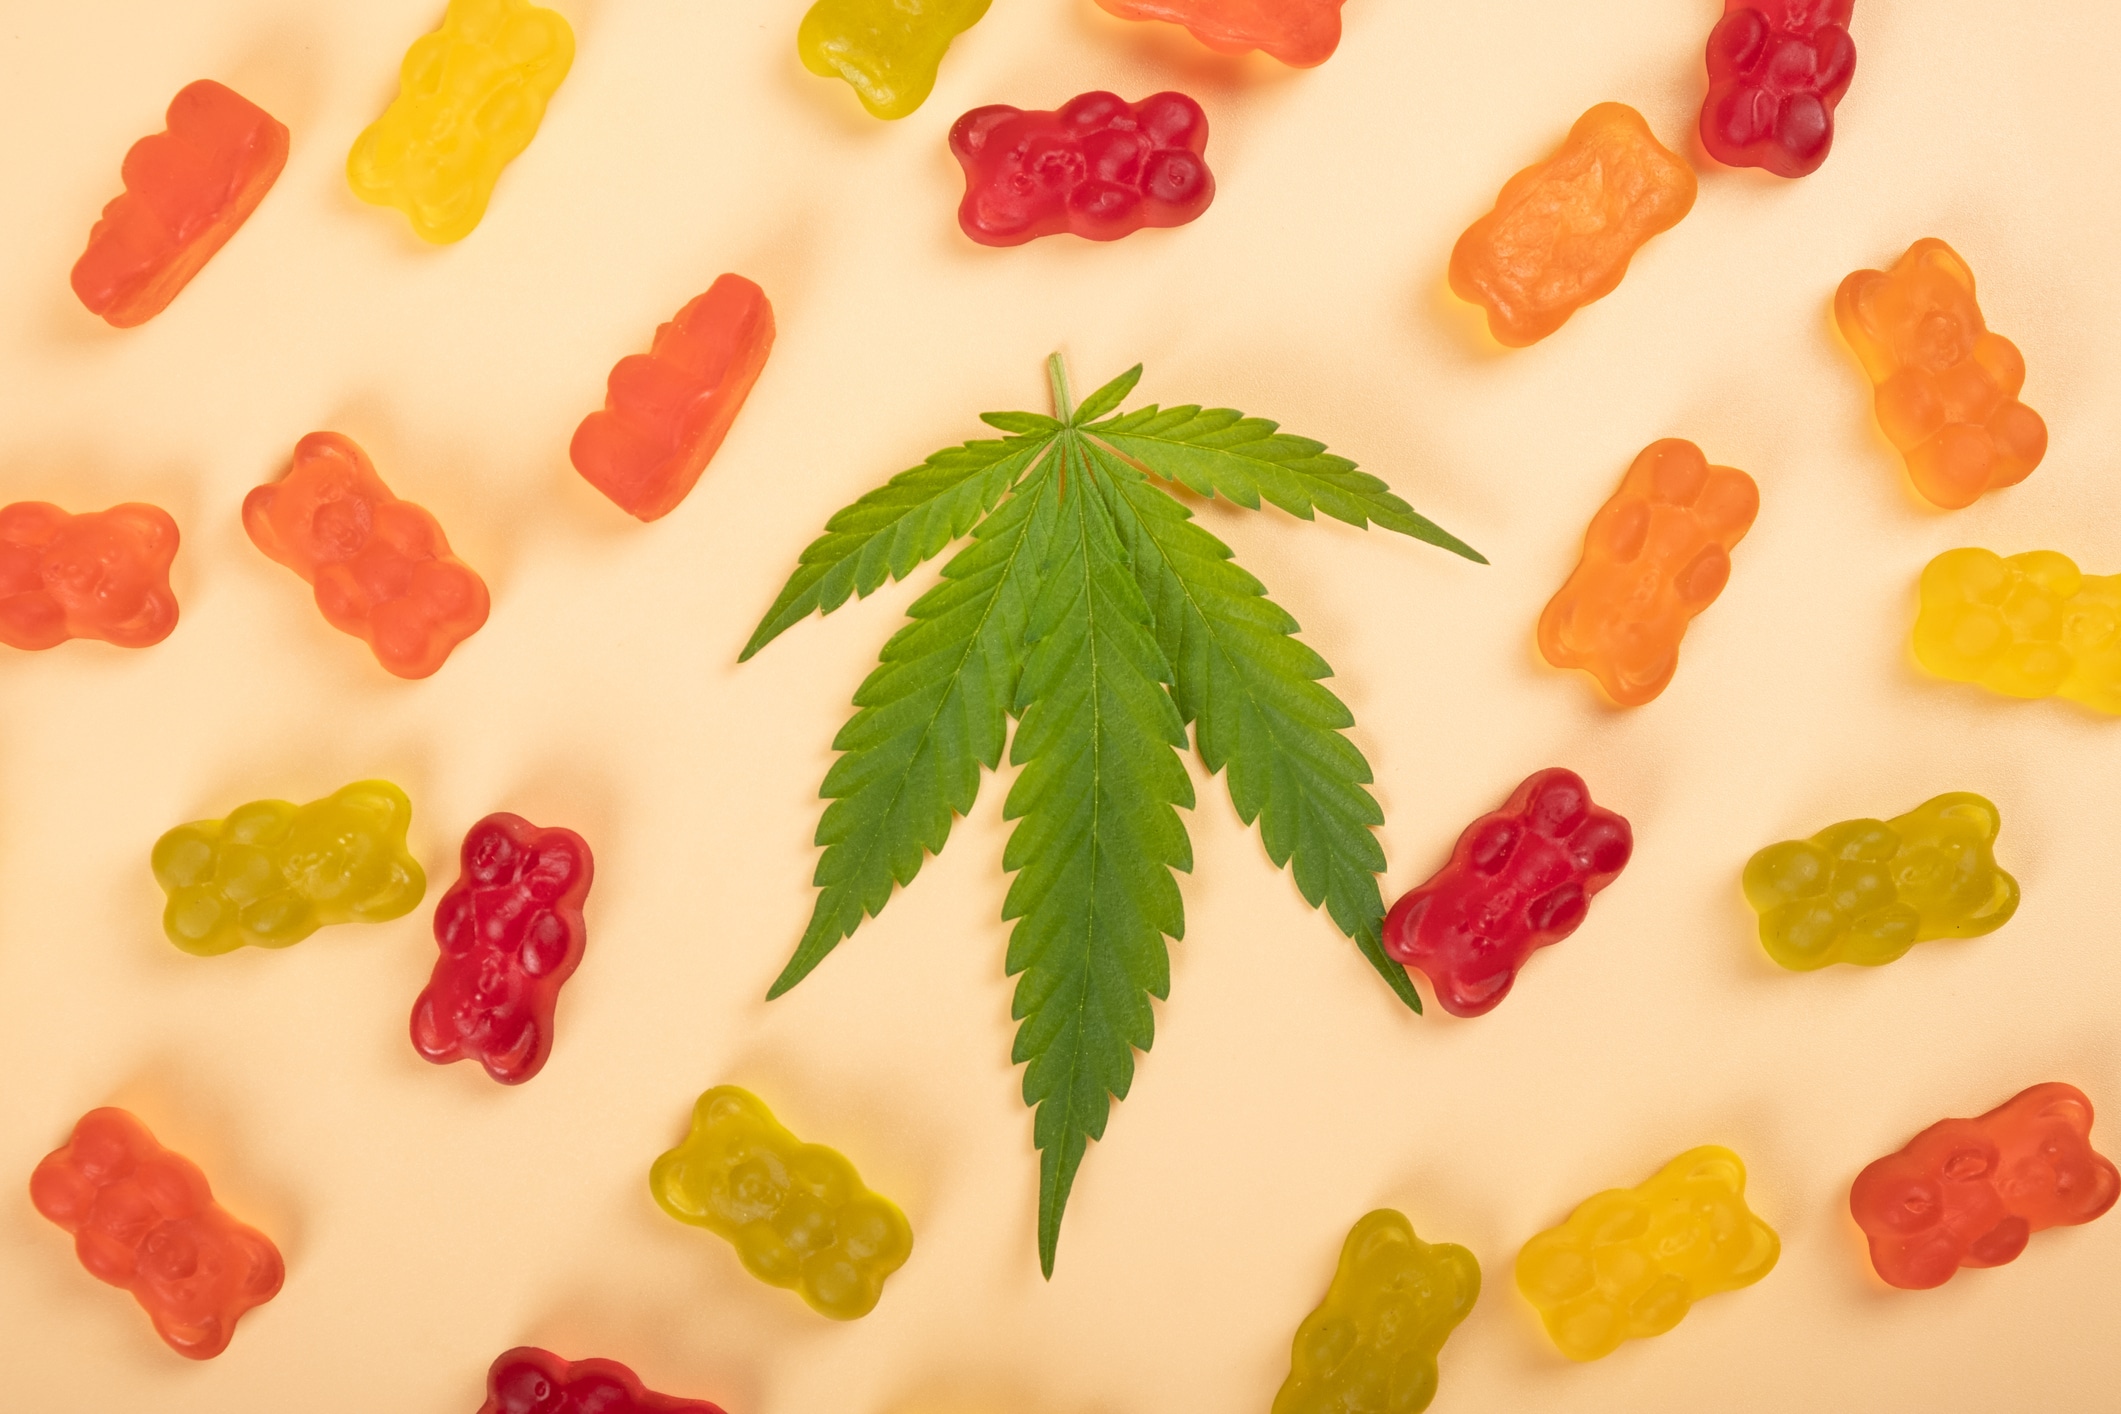 cannabis jelly candies, marijuana multicolored sweets drugs and green leaf on yellow background